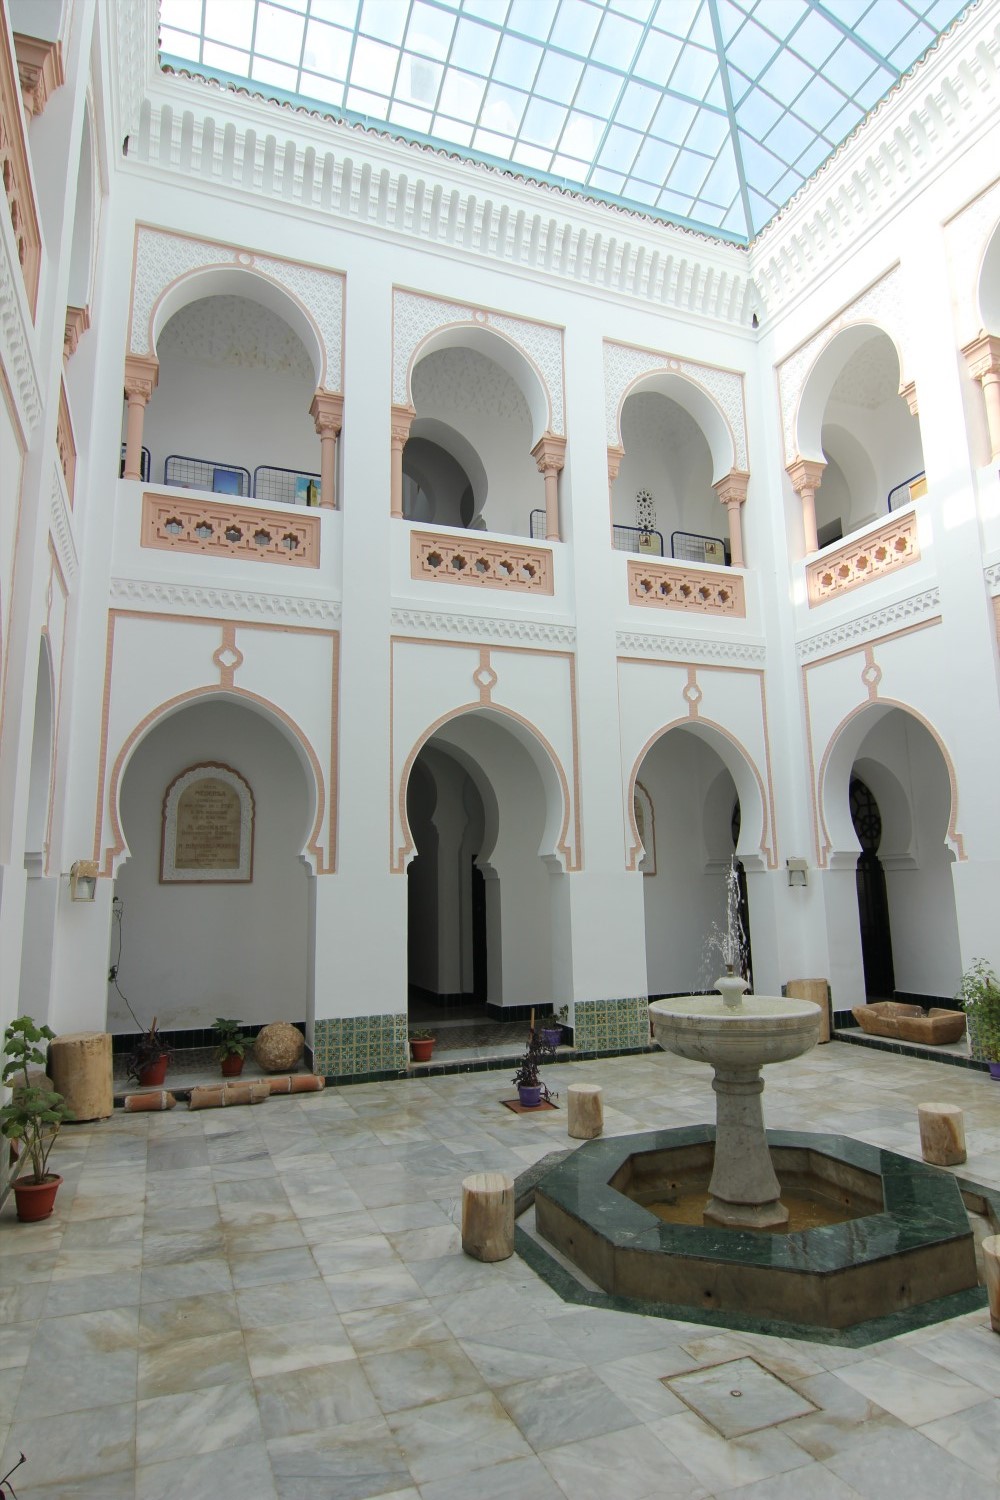 View of the front side of the courtyard, showing marble fountain